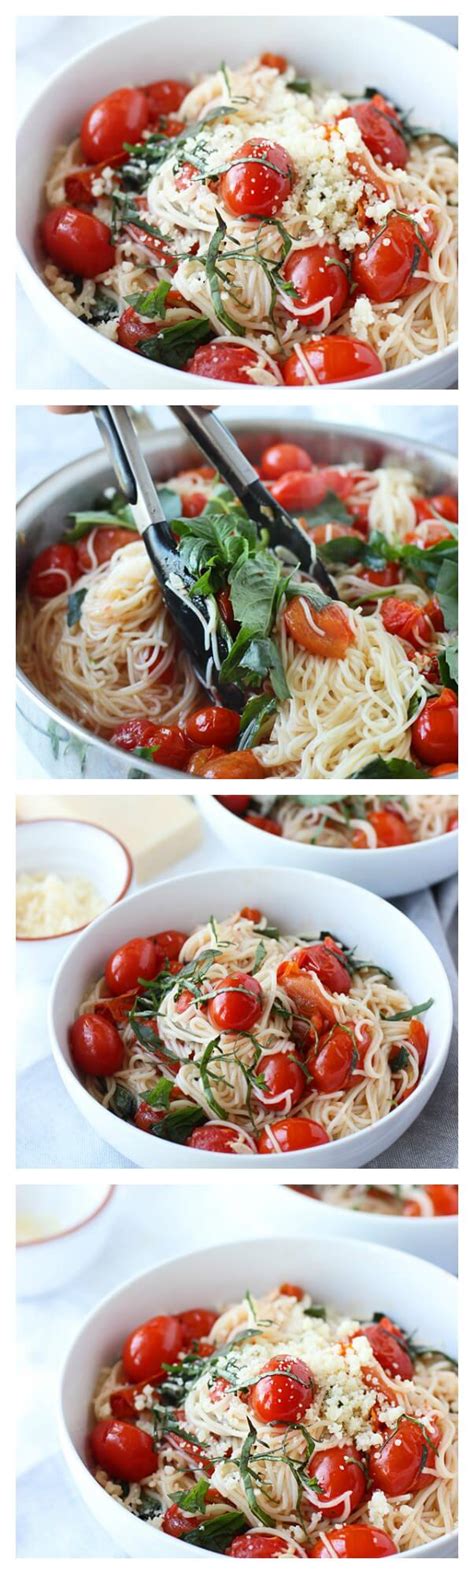 If it weren't for canning, it would fortunately, canning allows precious fruits and vegetables to live a much longer life. 20 Minute Cherry Tomato and Basil Angel Hair Pasta - Oh ...